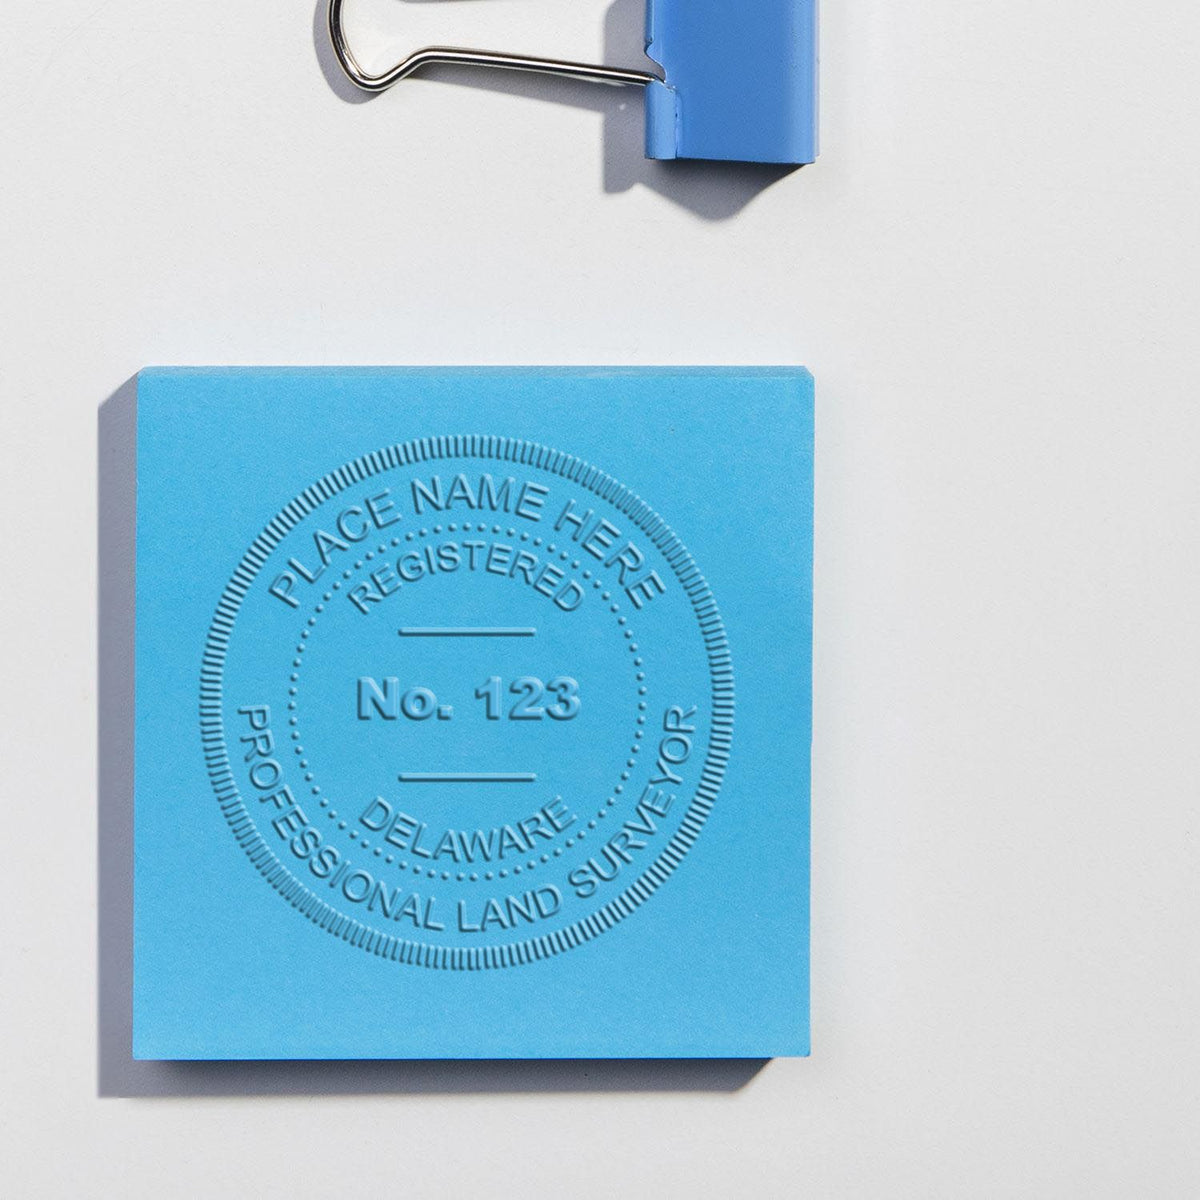 An in use photo of the Gift Delaware Land Surveyor Seal showing a sample imprint on a cardstock